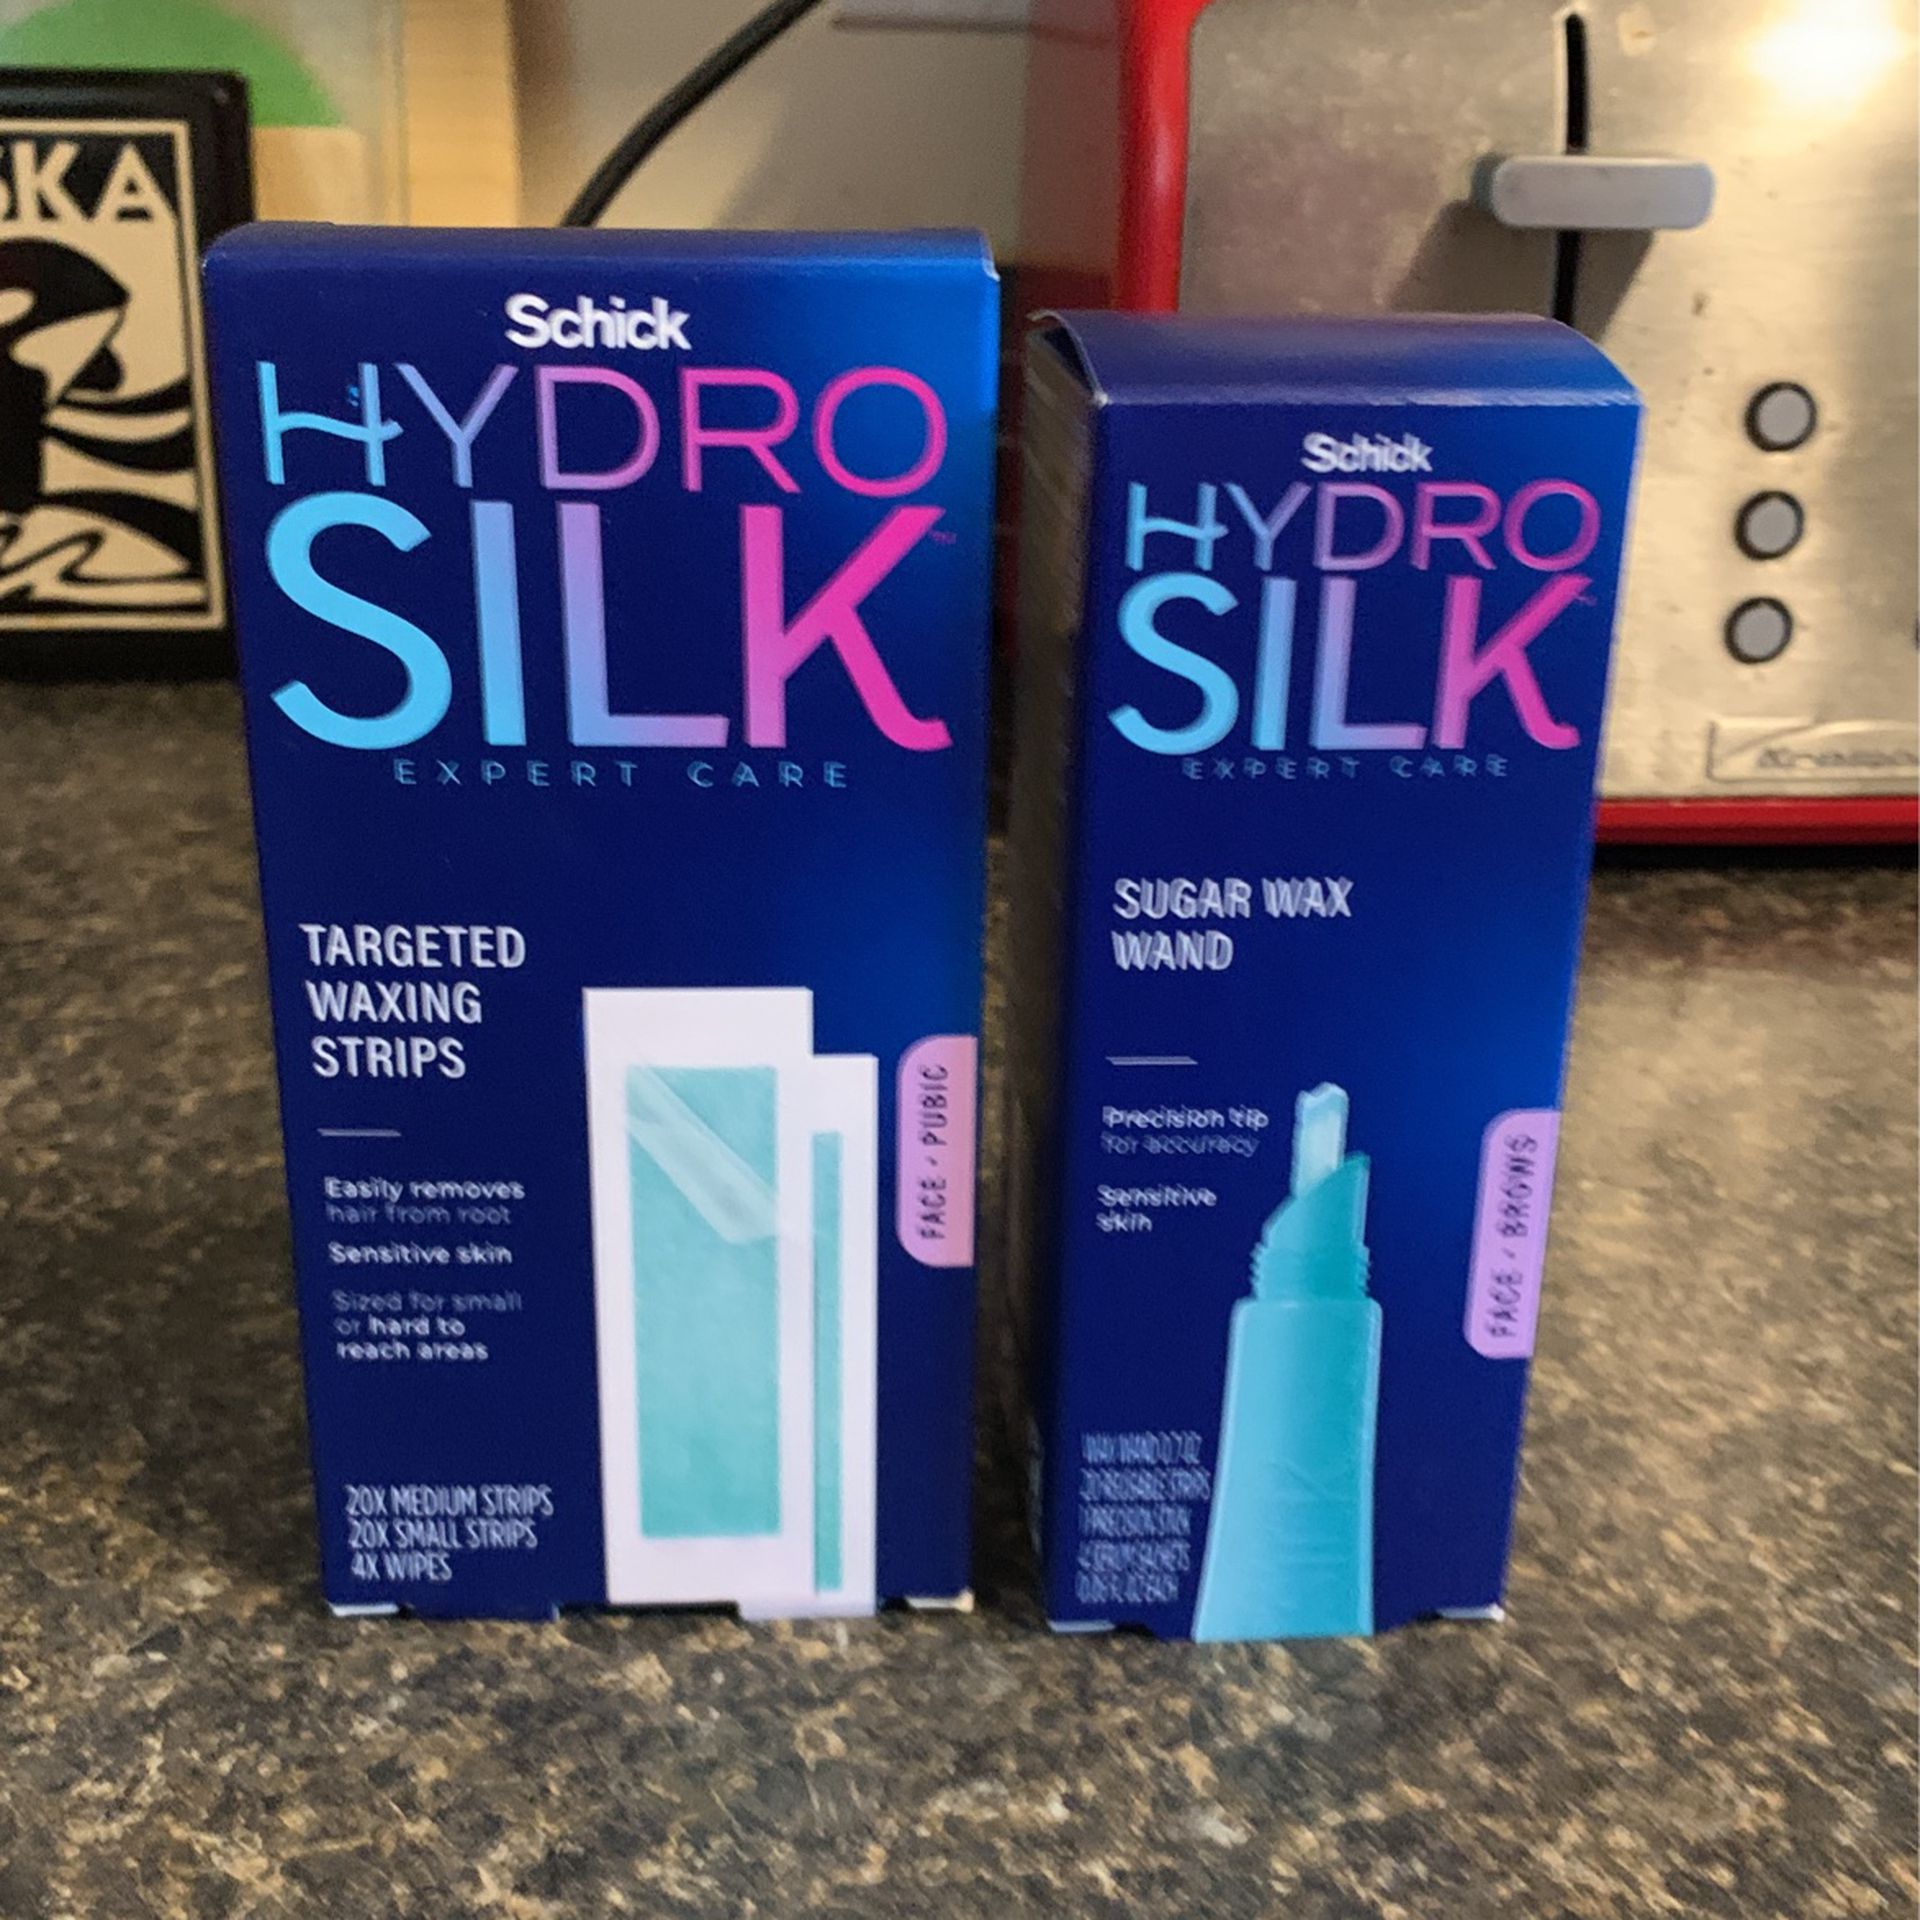 Schick Hydro Silk Targeted Wax Products-2 Items!($19.88+ Value)